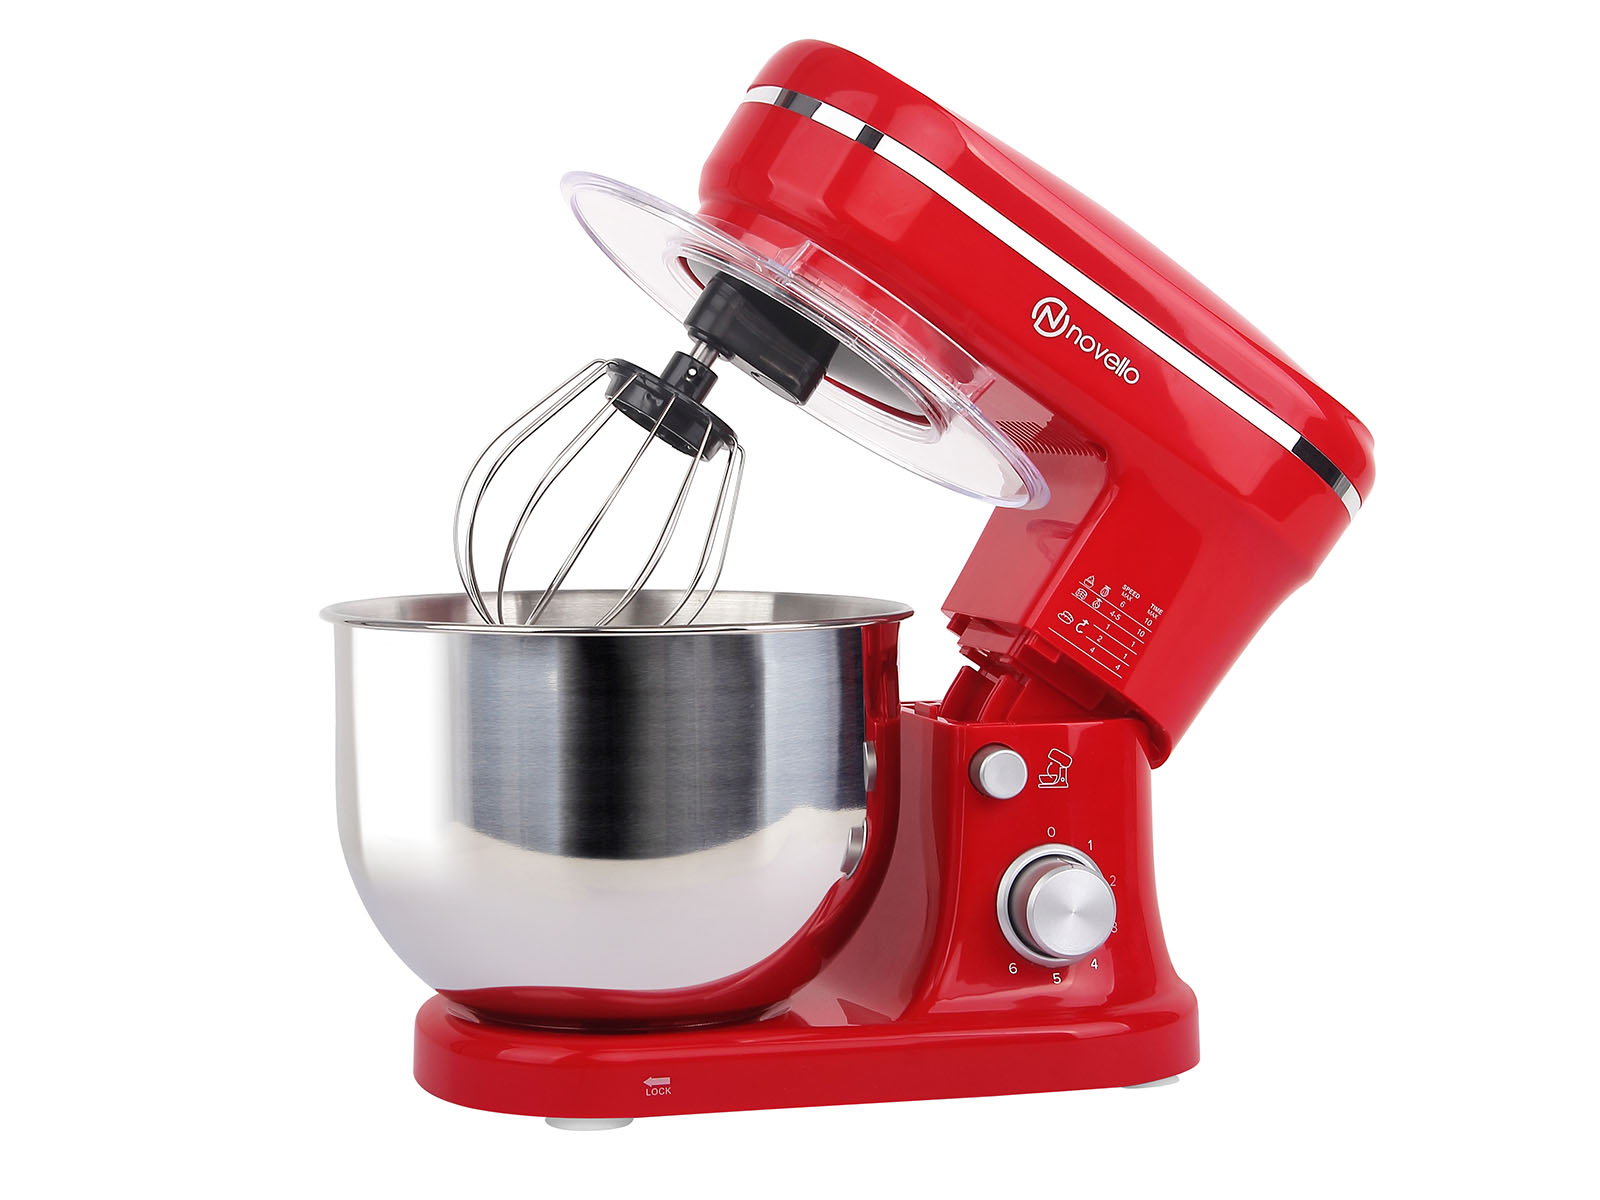 5L Red Electric Kitchen Stand Mixer